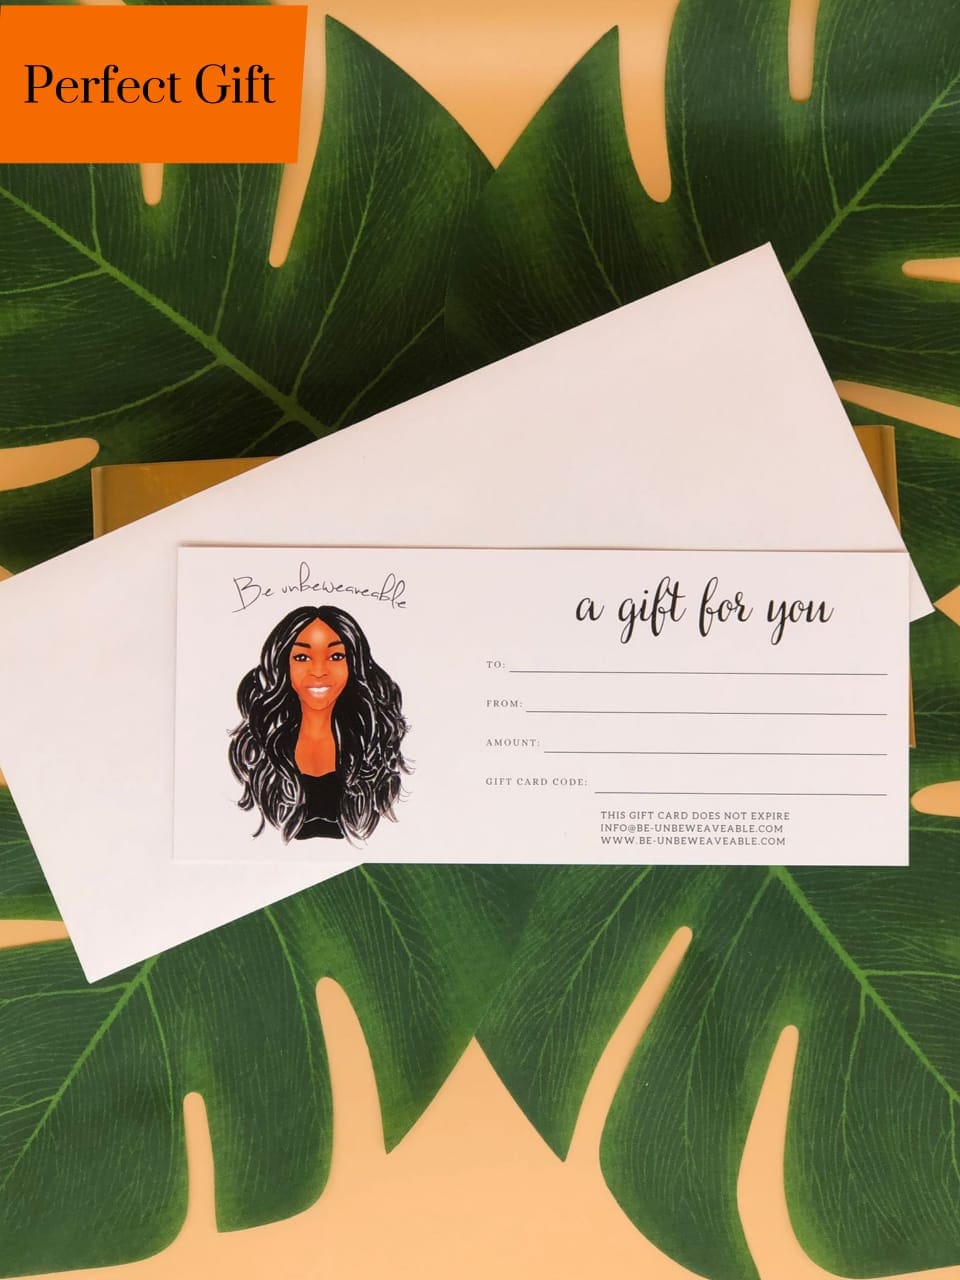 Be unbeweaveable Gift Card